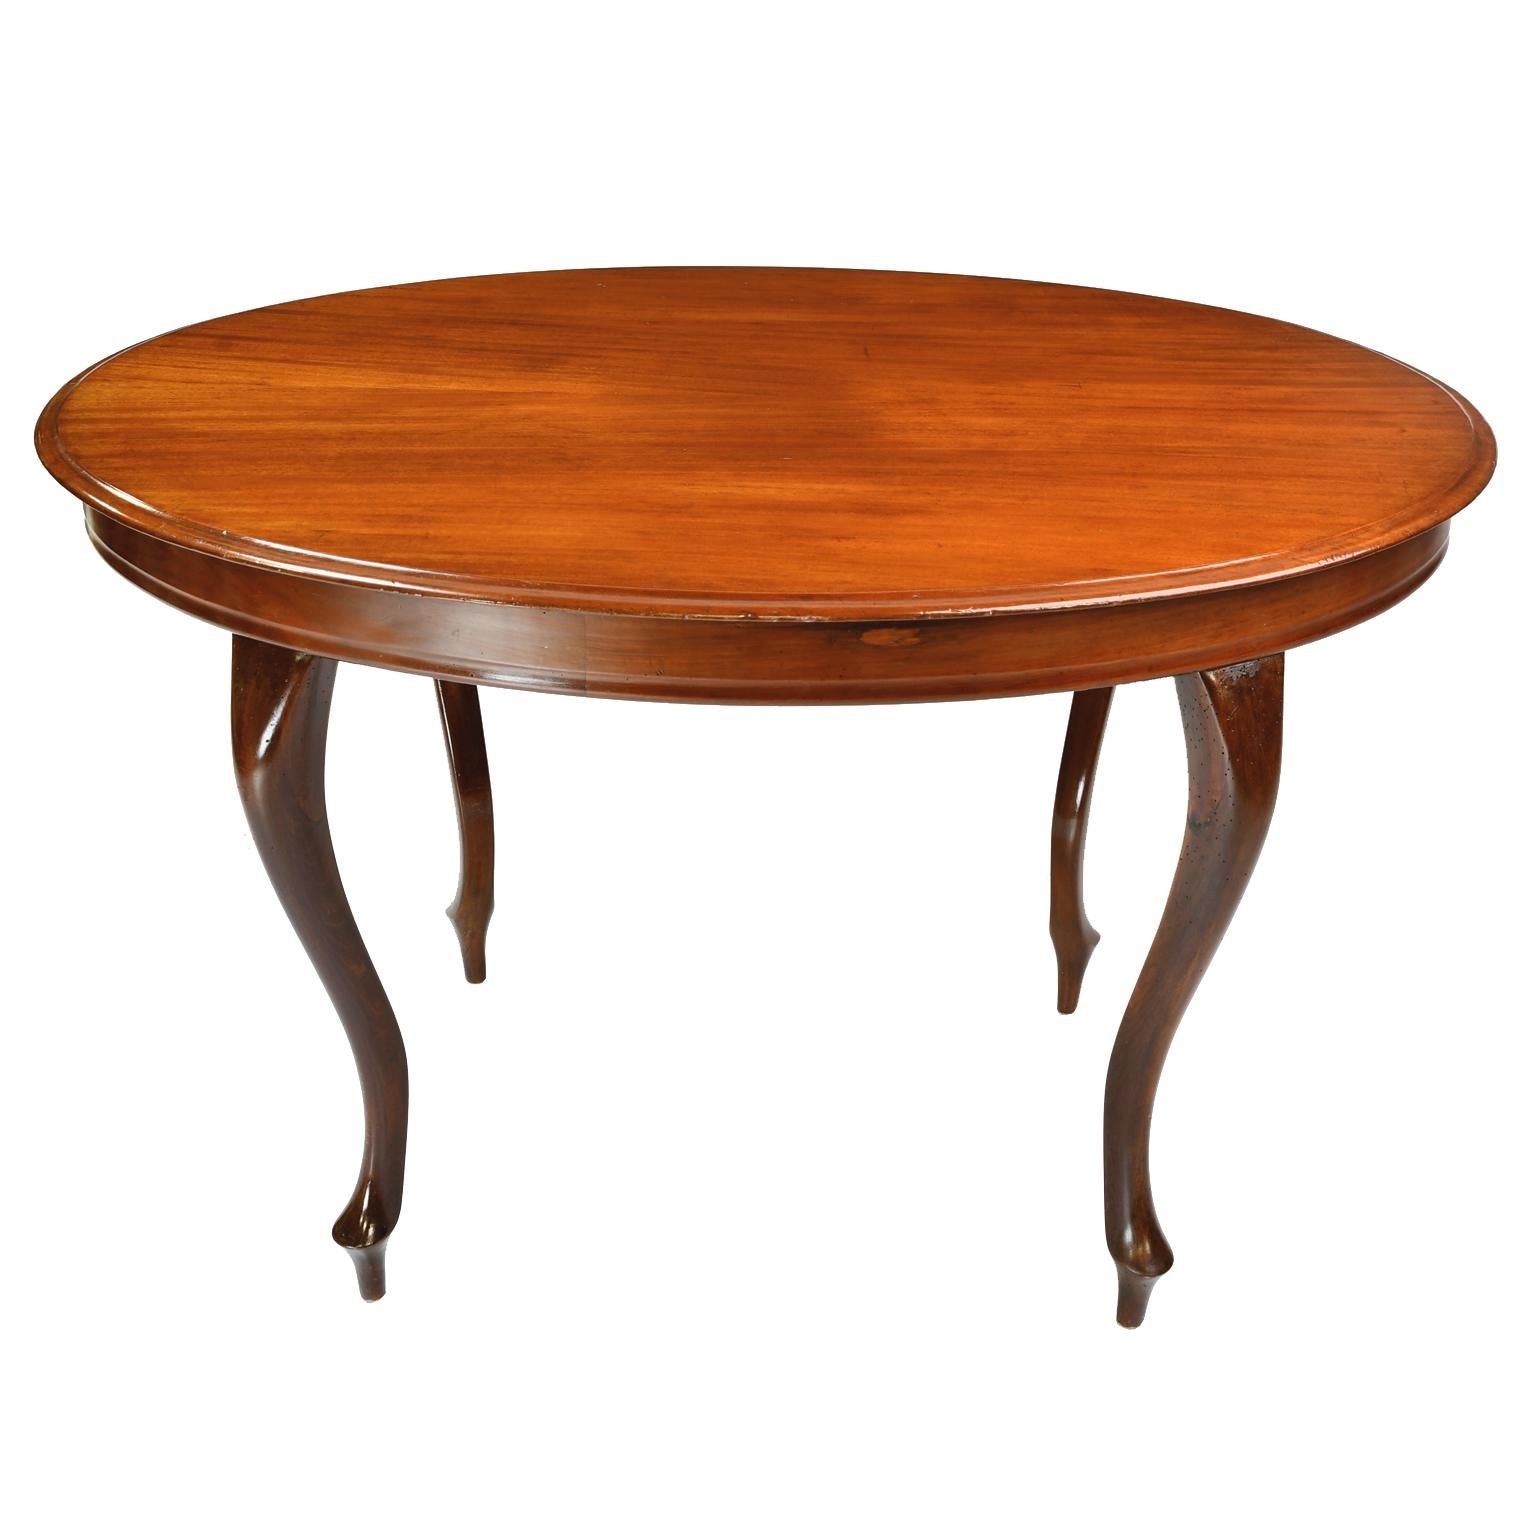 19th Century Antique Louis Philippe Style Mahogany Oval Dining/ Center Table, Denmark, c 1860 For Sale